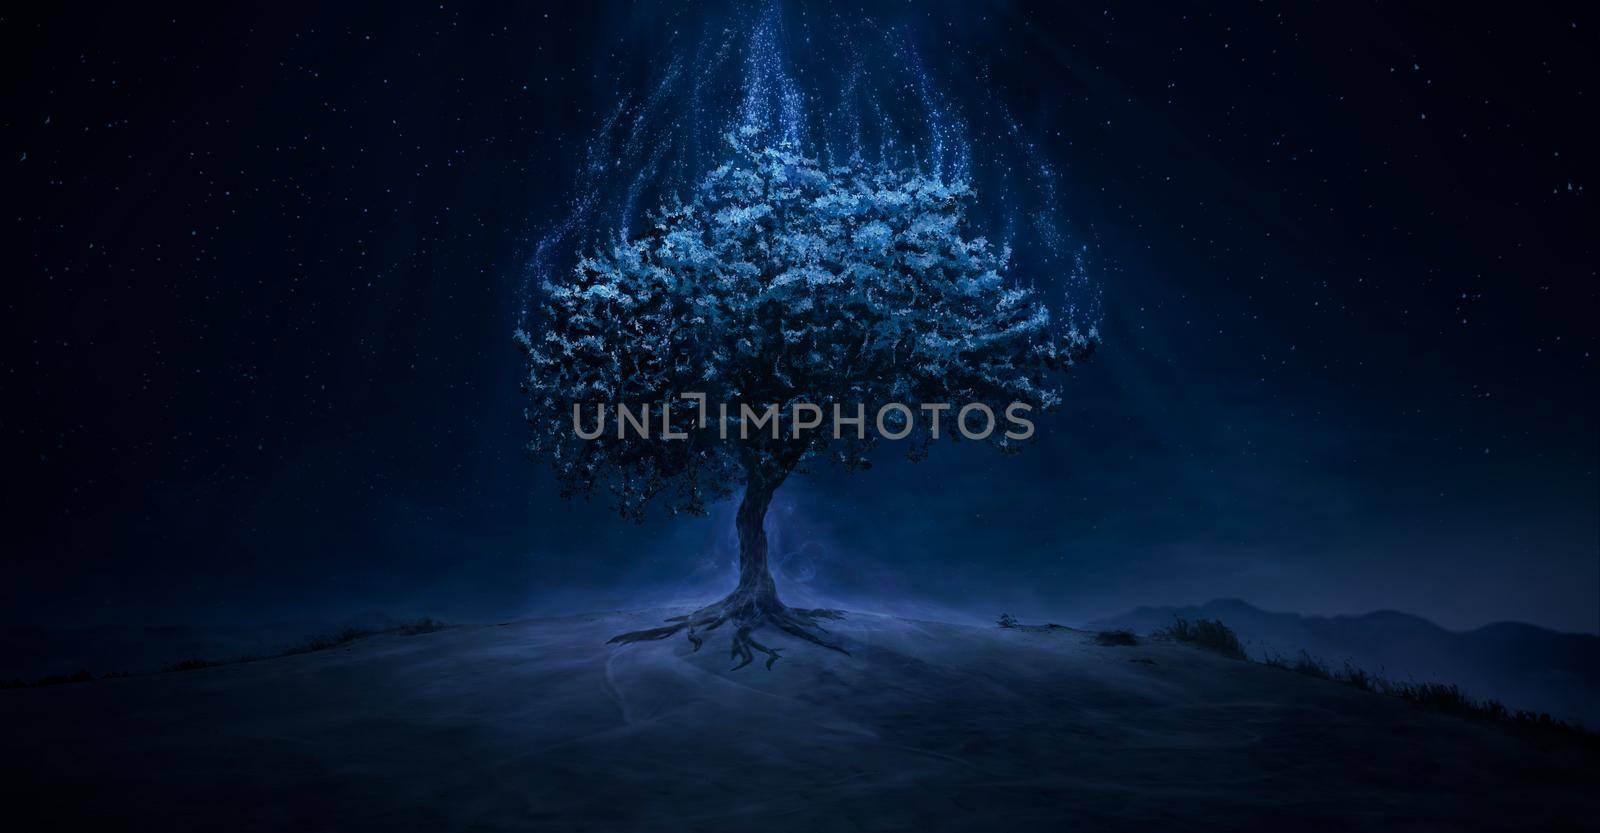 Illustration of a shining mystical magic tree on the hilltop